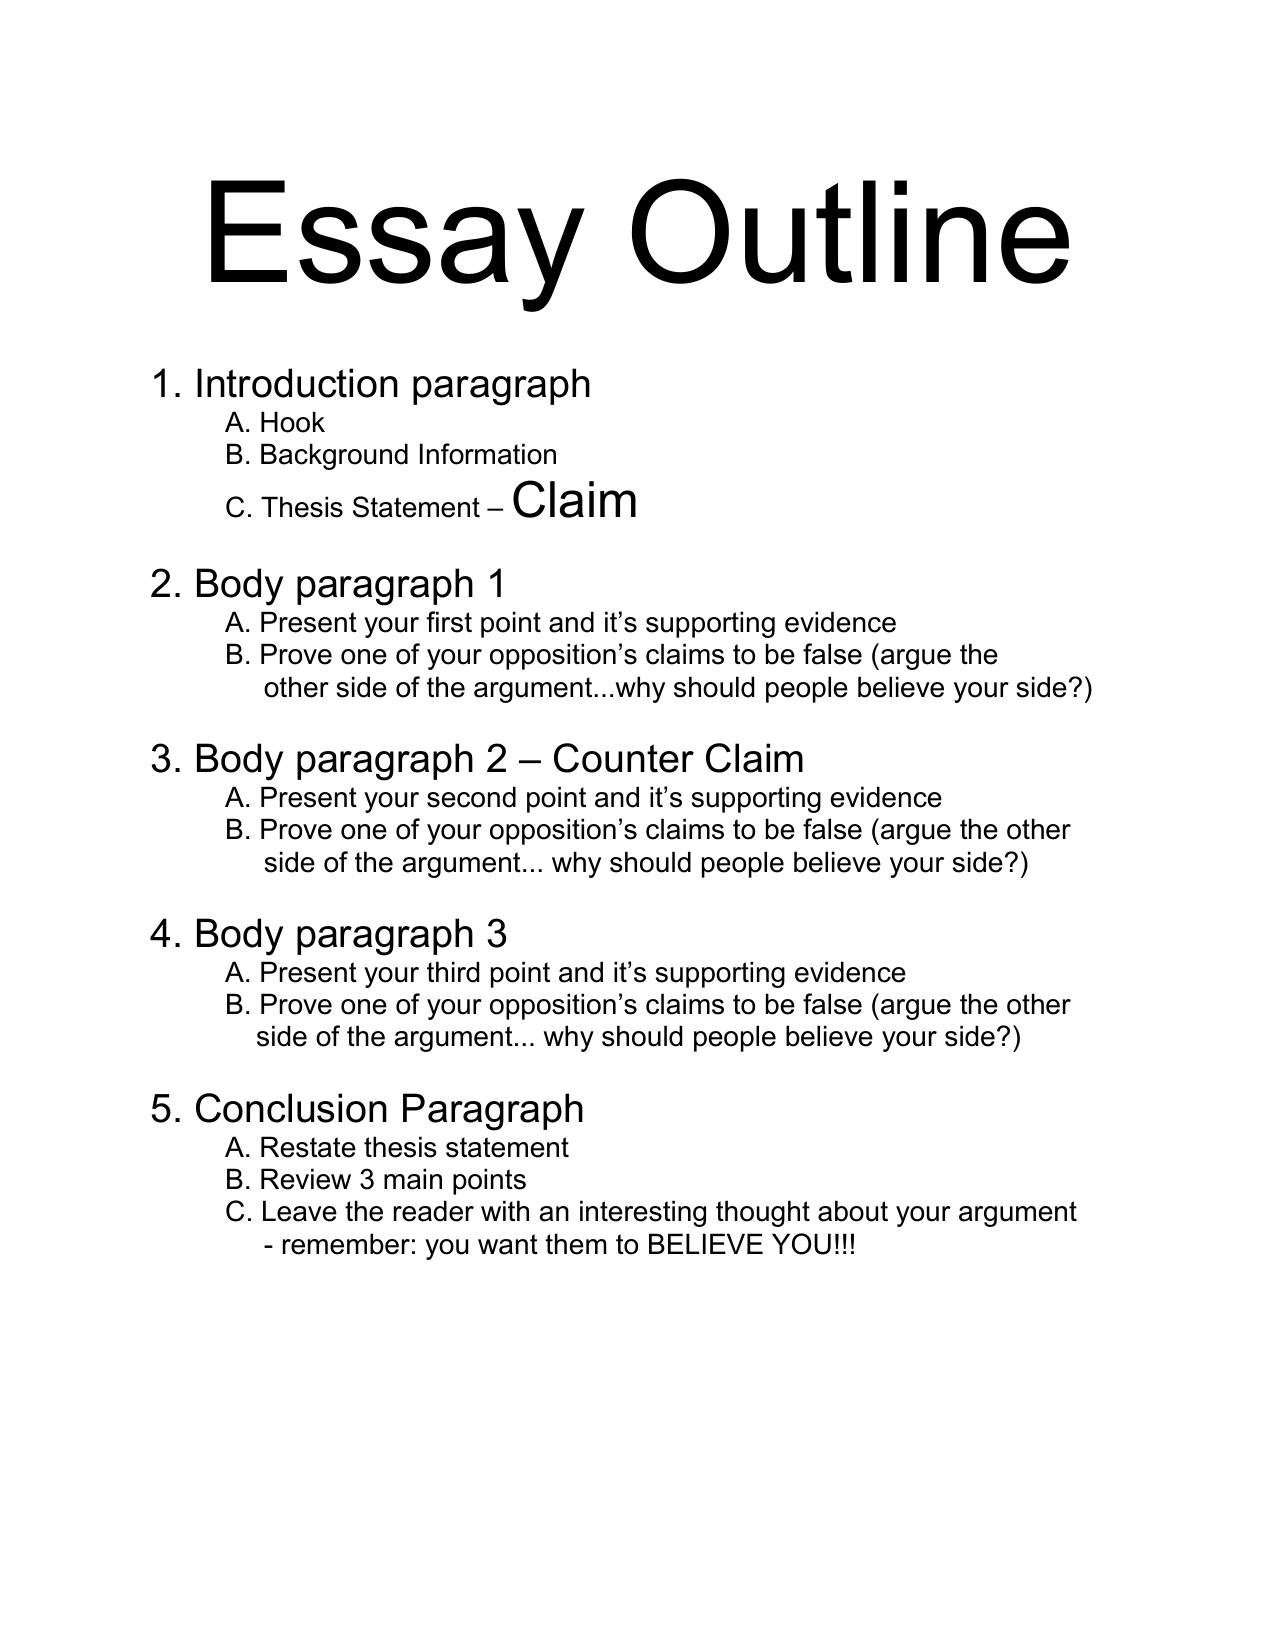 examples of an outline for an essay